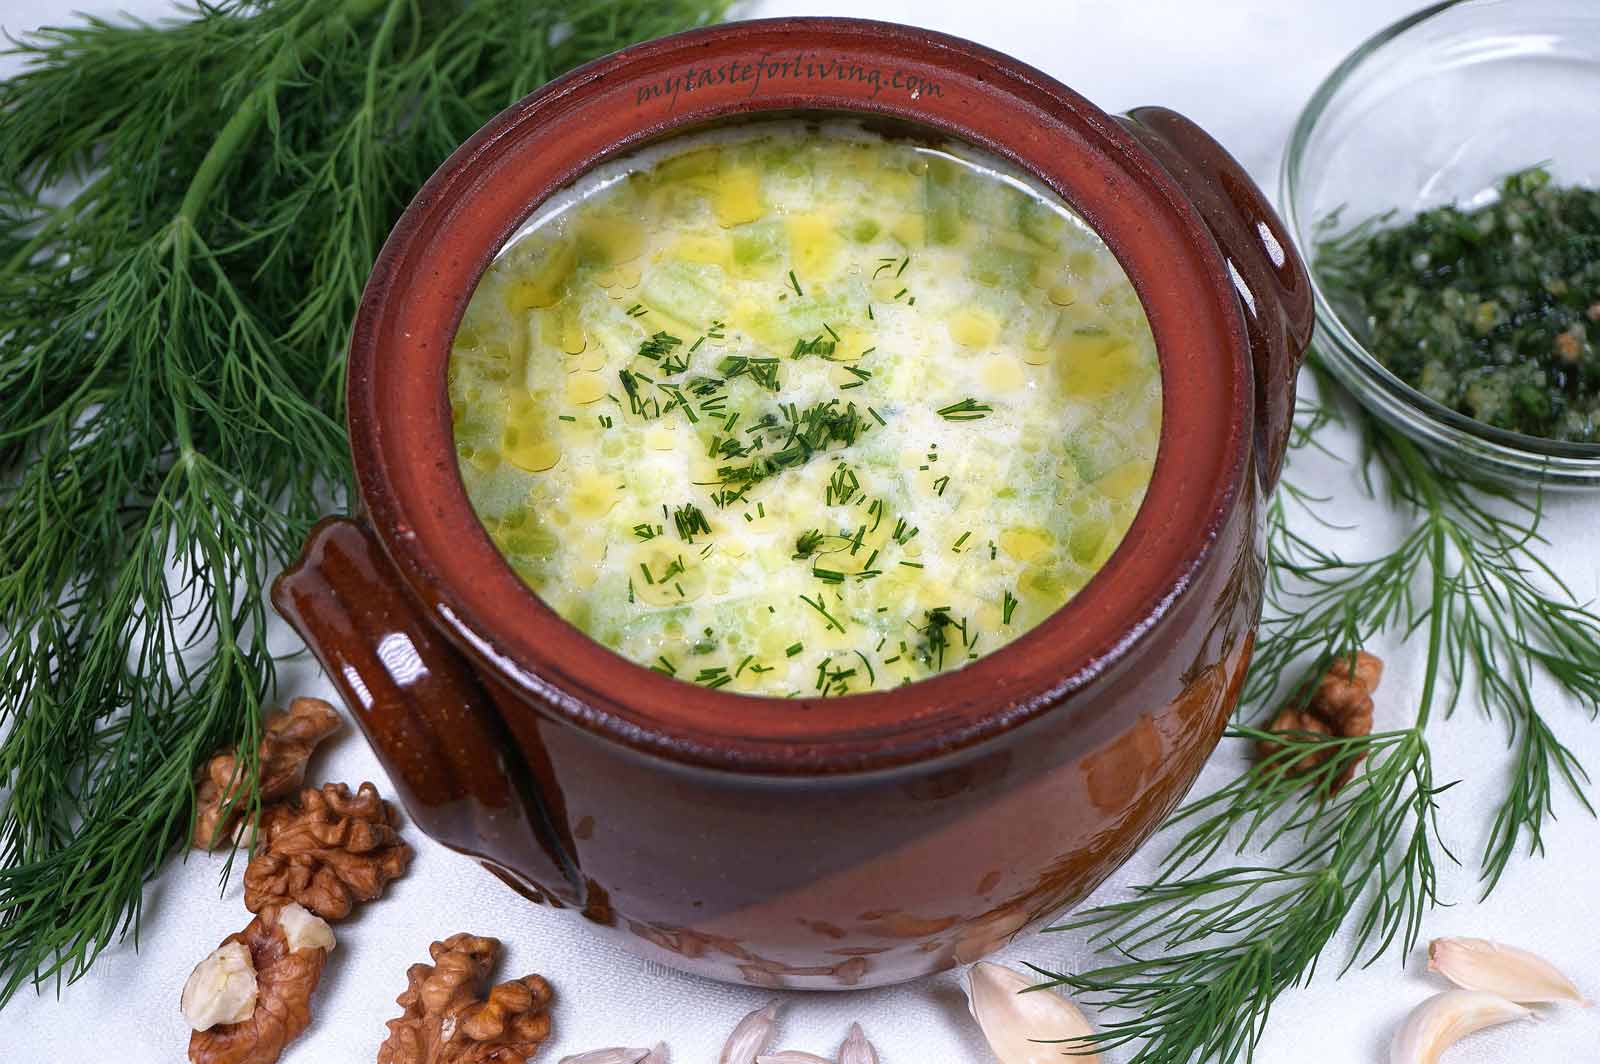 TARATOR - THE REFRESHING AND NUTRITIOUS BULGARIAN COLD SOUP: UNCOVERING ITS HISTORY, MYTHS, AND UNIQUE FLAVORS